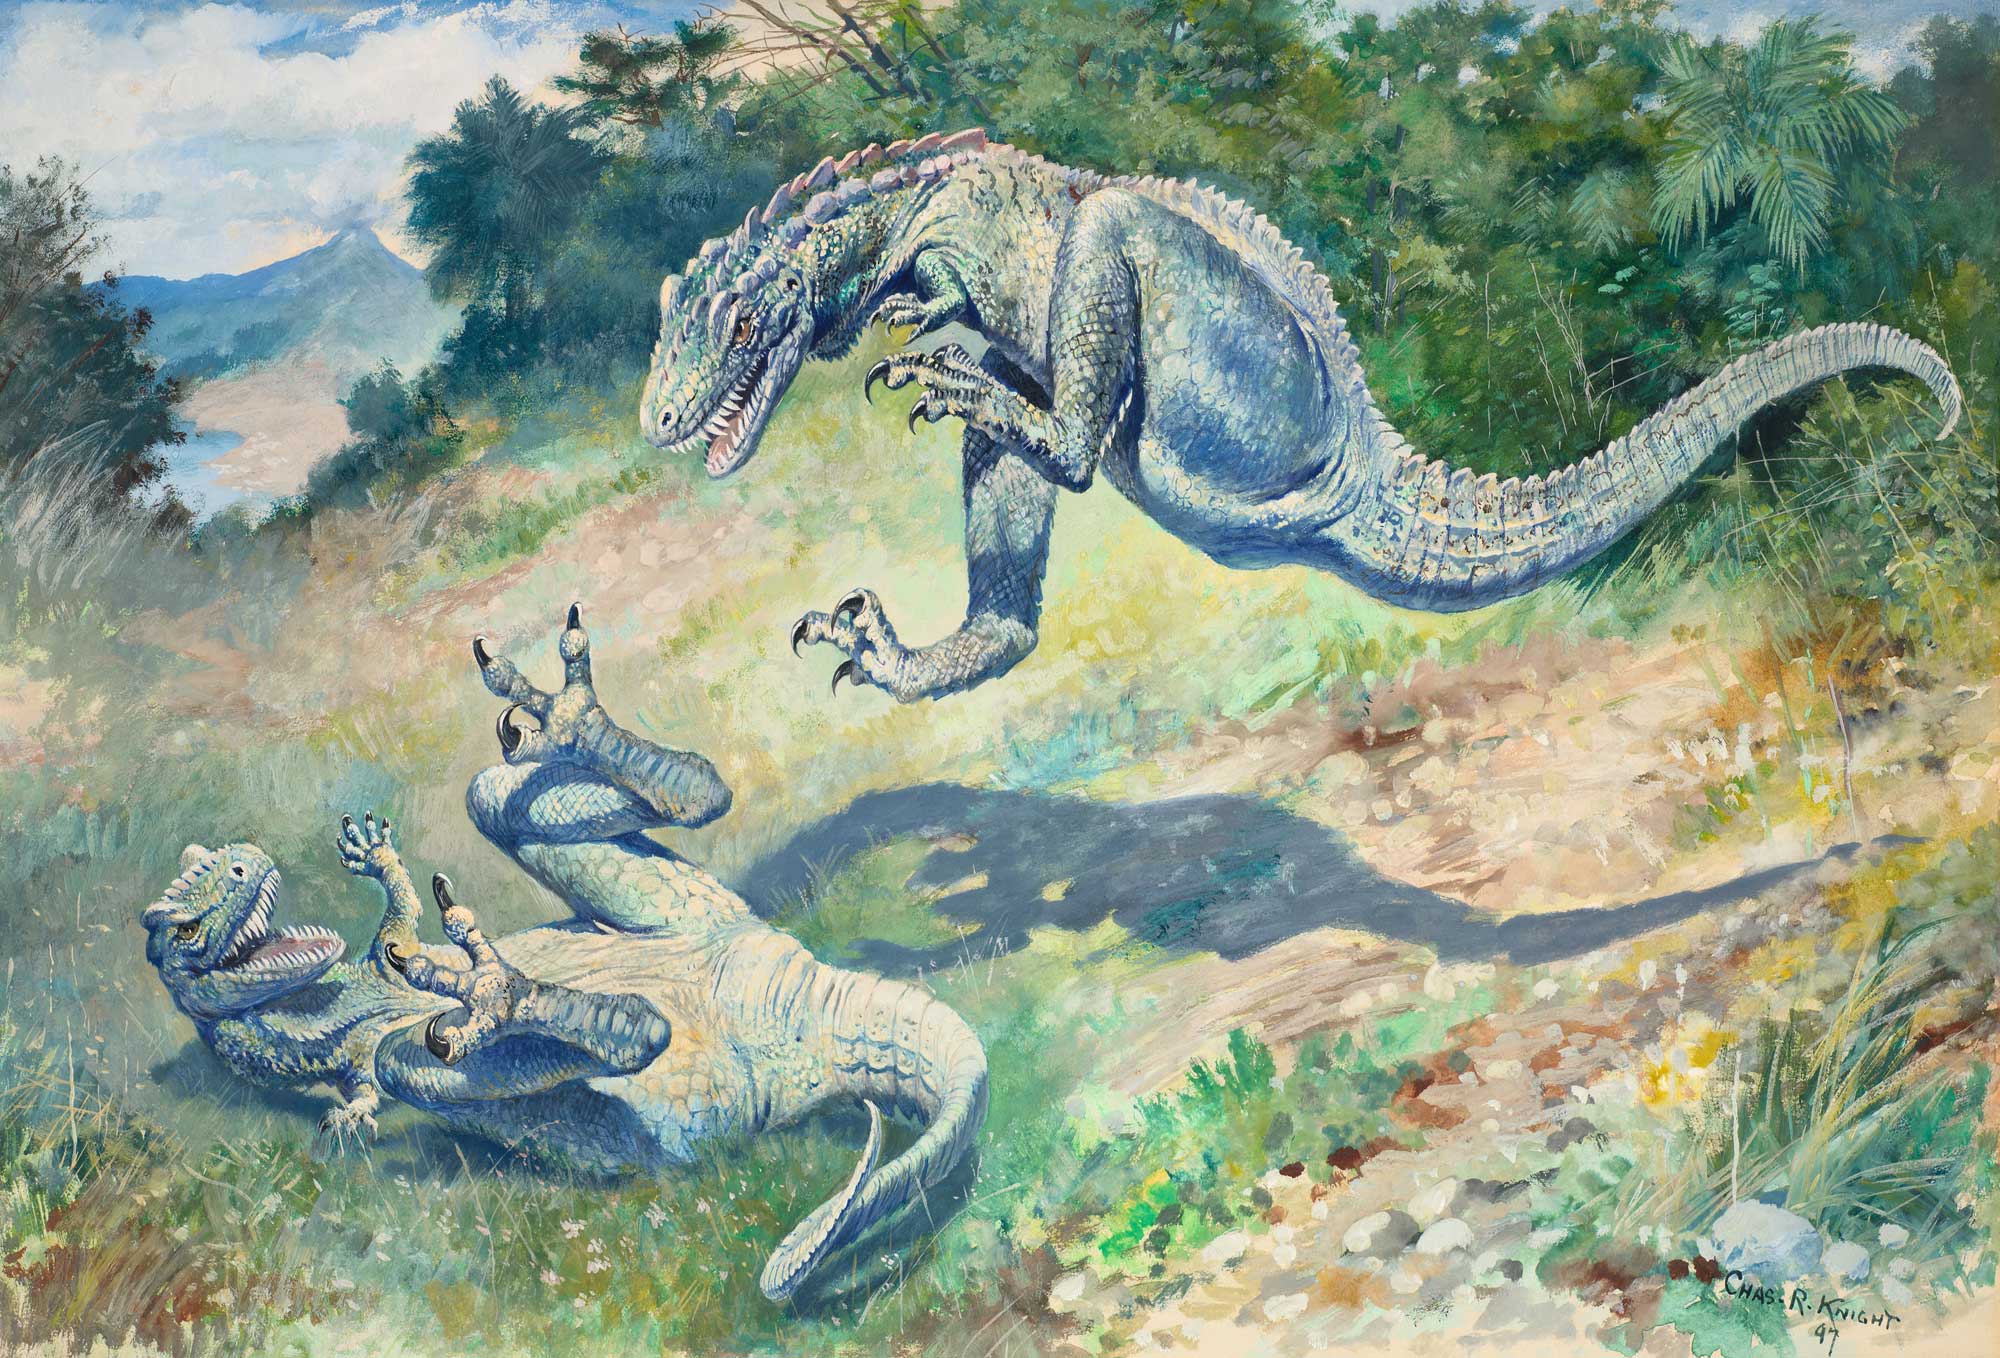 Photograph of a painting of Dryptosaurus by Charles R. Knight. The painting shows two carnivorous dinosaurs. One is on its back with its arms and legs in the air in a defensive posture. The other is in the air, pouncing.